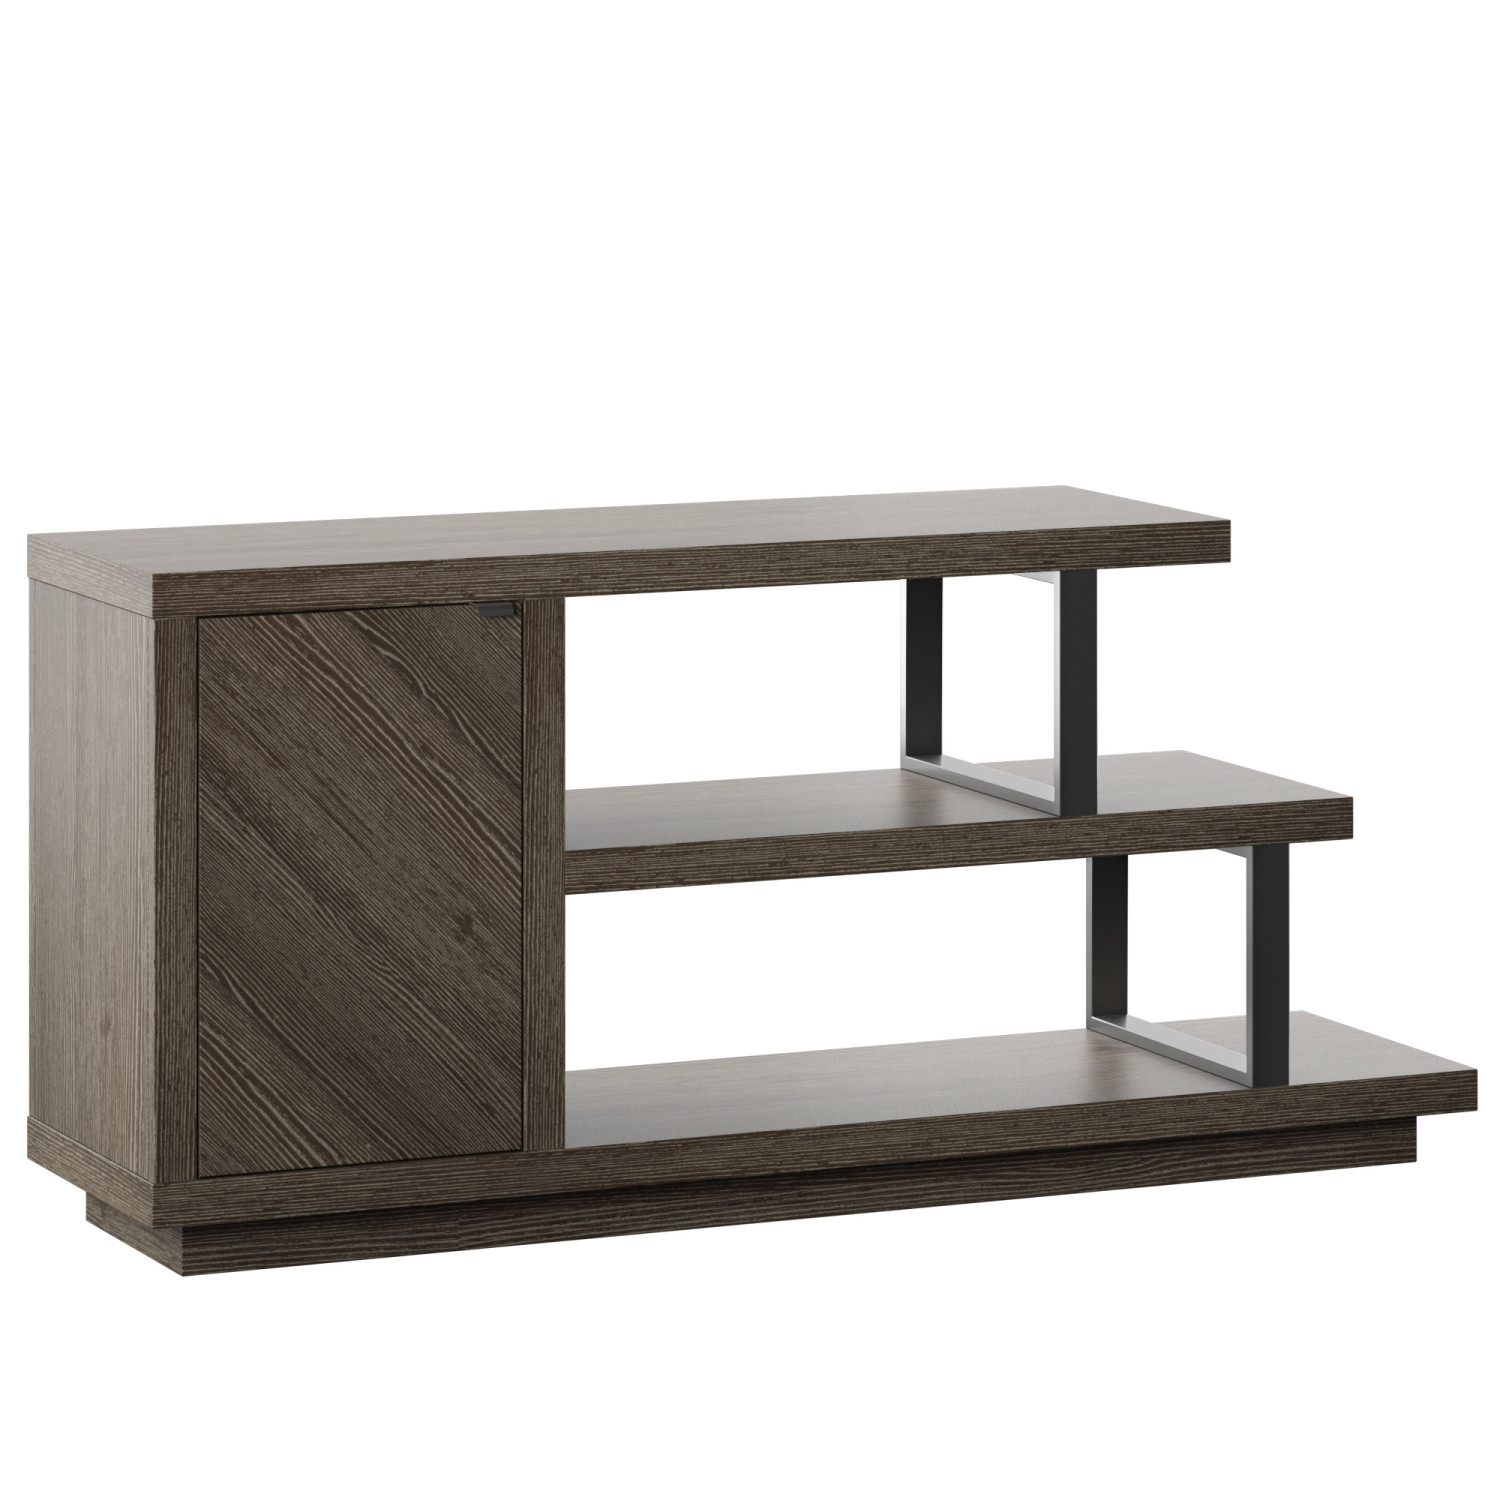 TV Stand for TVs up to 55” with Asymmetrical Shelves in Curtis Oak - image 4 of 14